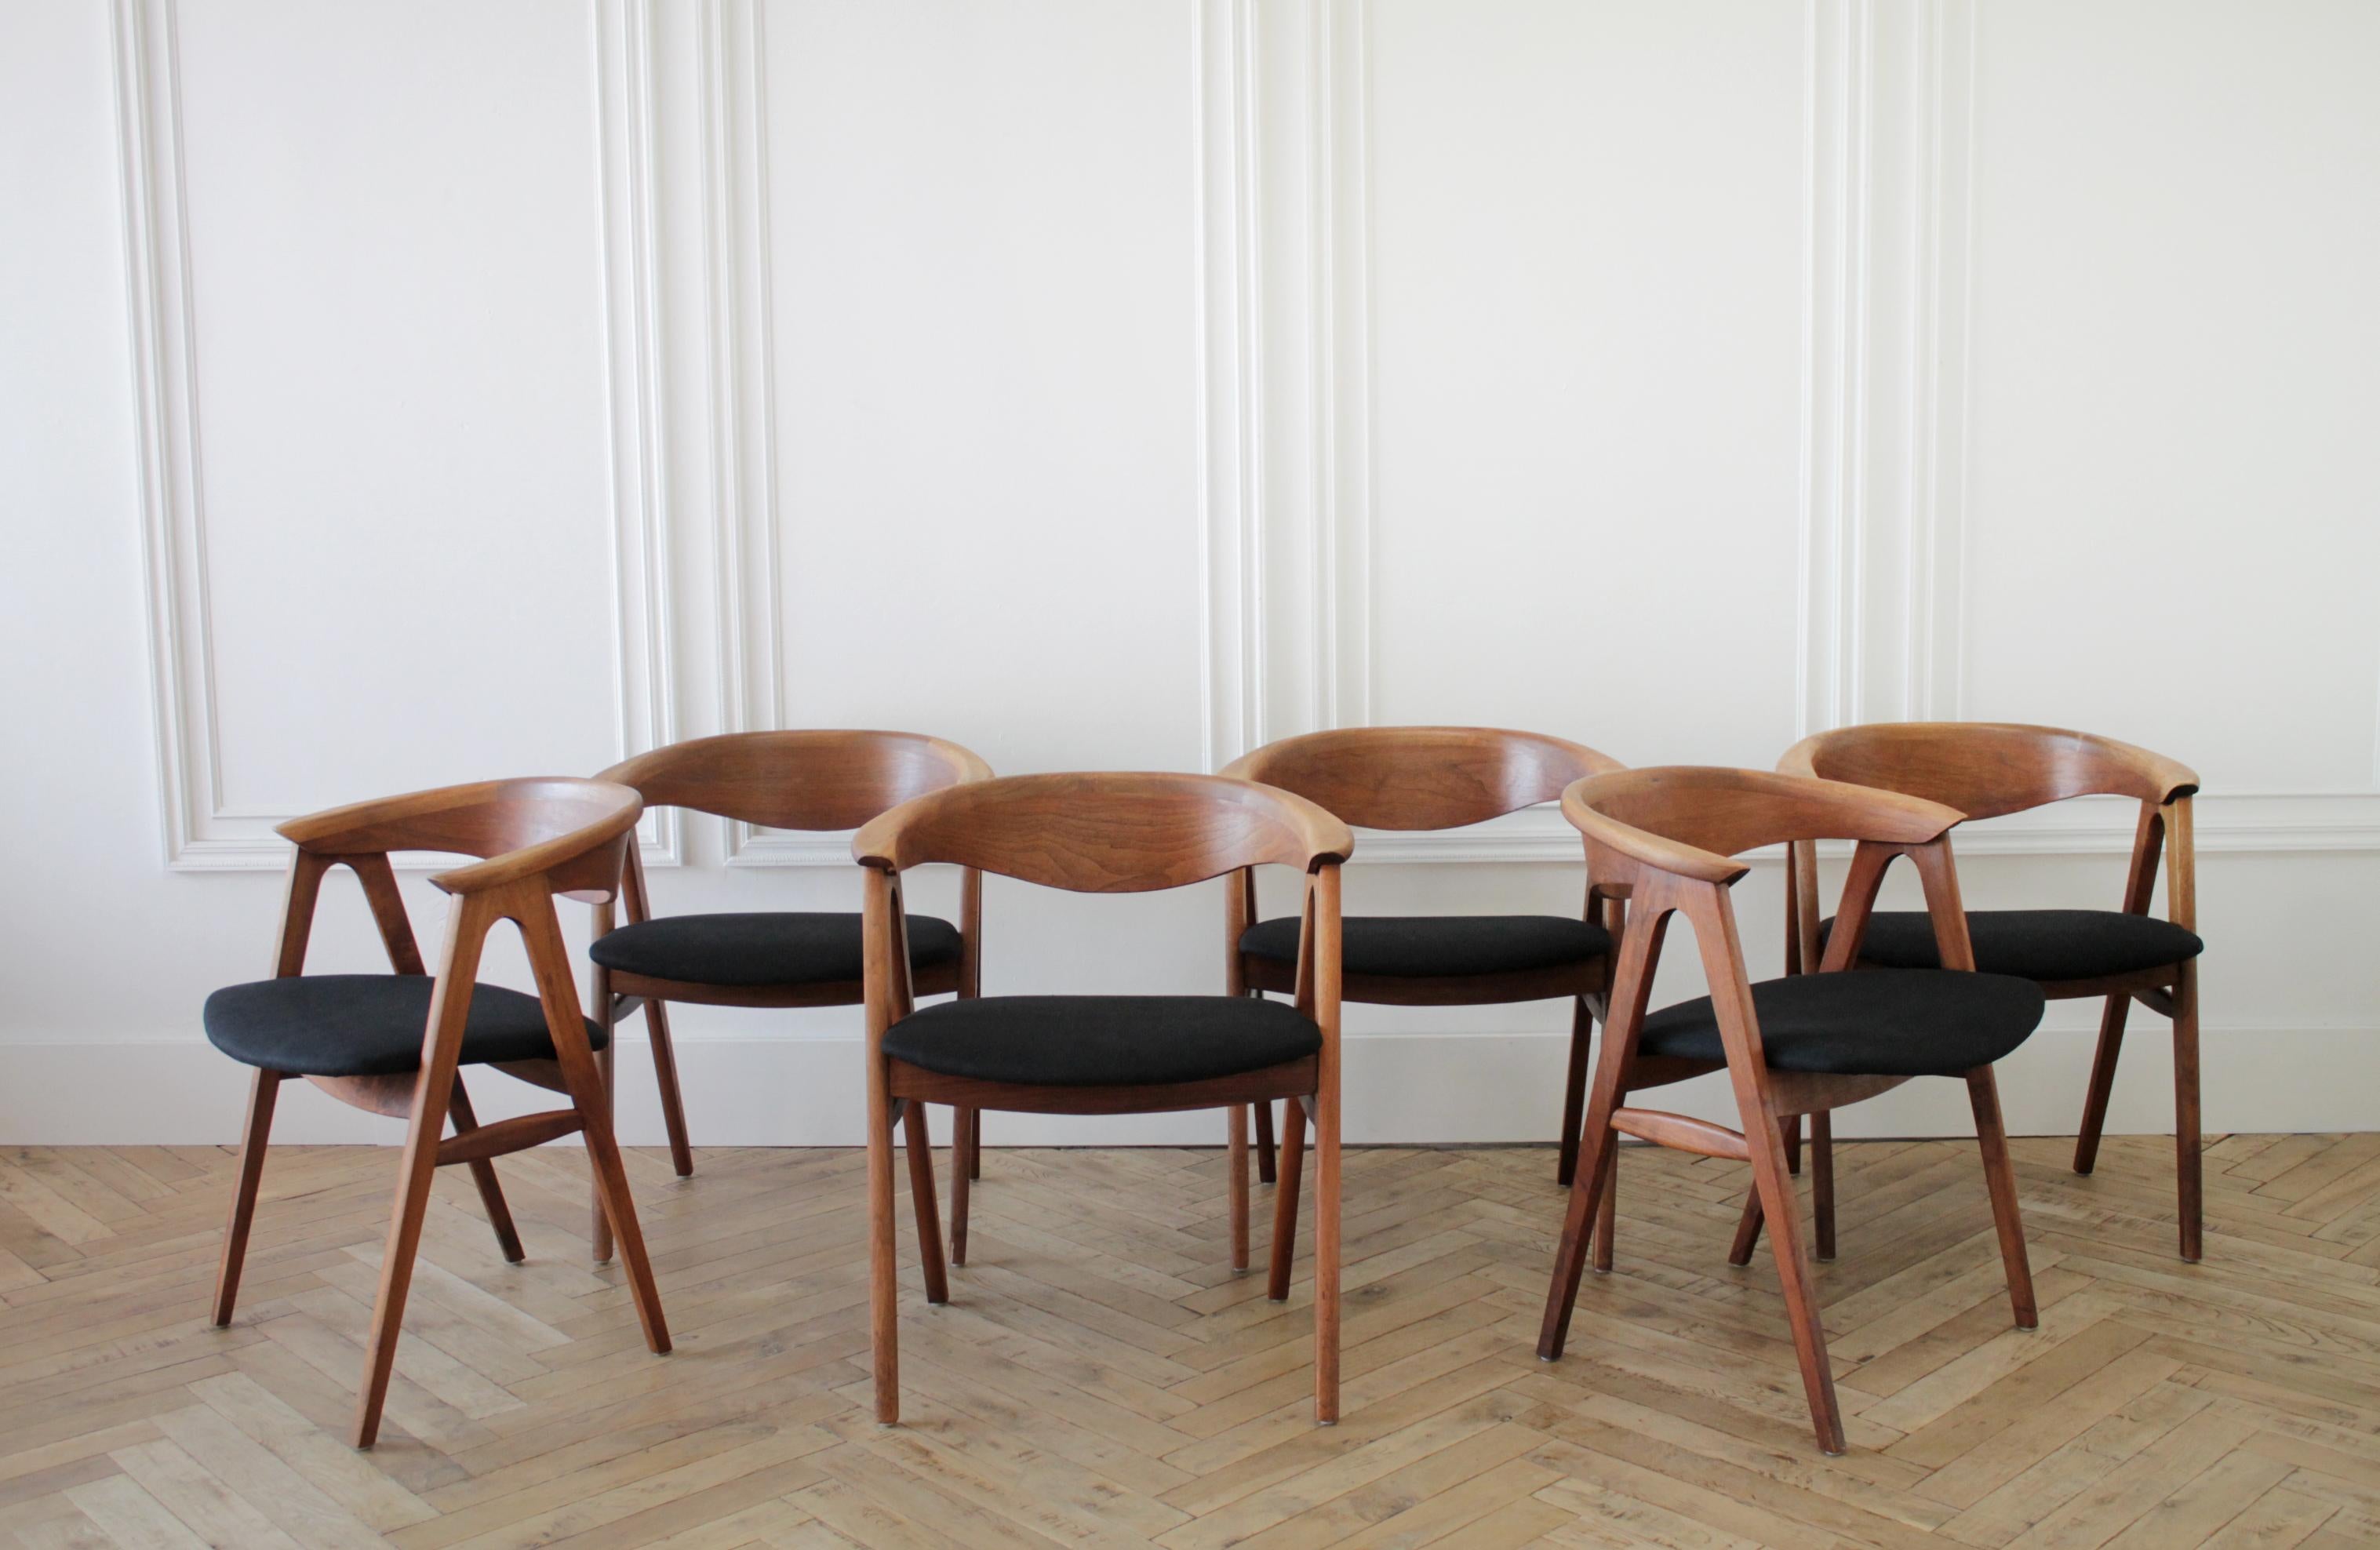 Set of 6 vintage Mid-Century Modern style dining chairs from the 1960s
The seats have been reupholstered in a black Belgian linen.
Each chair is solid and sturdy, ready for everyday use.
Wood finish has a vintage patina, with some lighter areas.